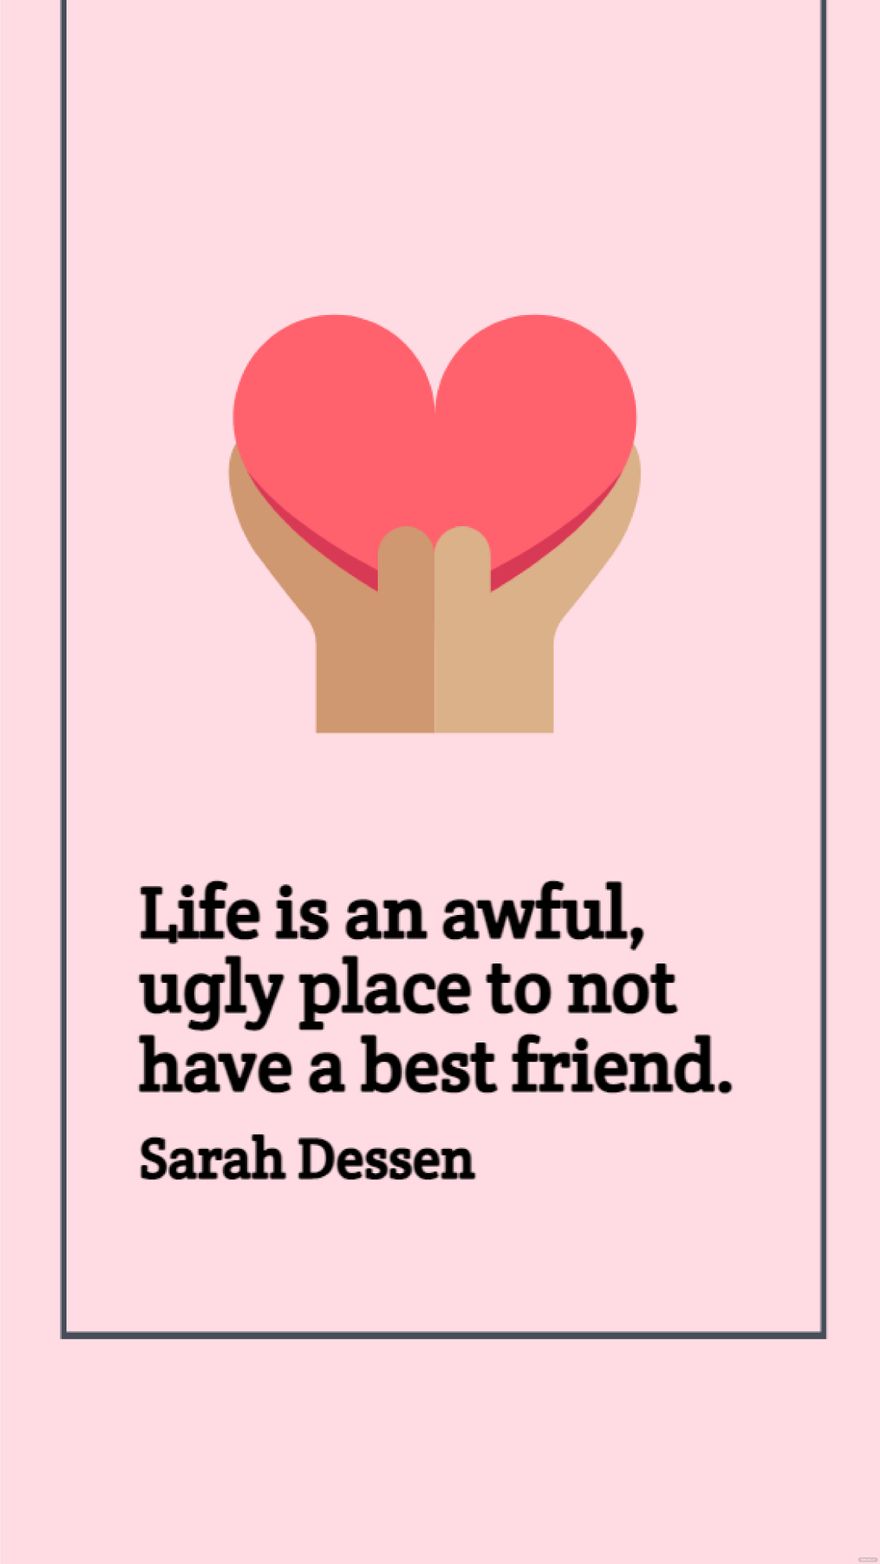 Sarah Dessen - Life is an awful, ugly place to not have a best friend.